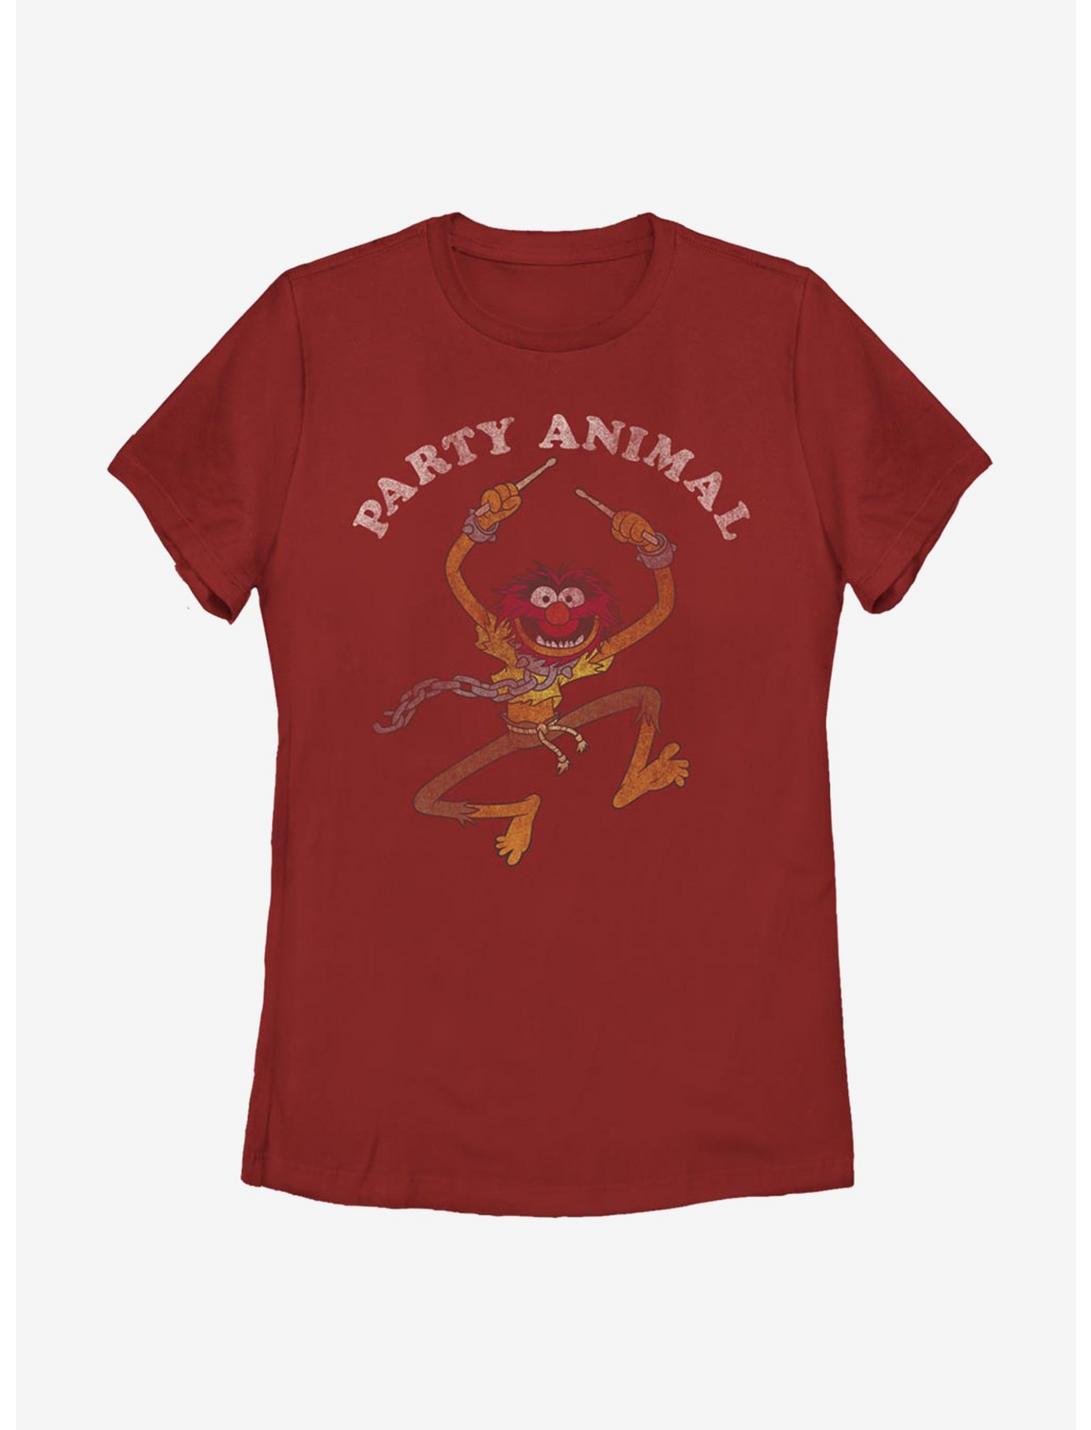 Disney The Muppets Party Animal Womens T-Shirt, RED, hi-res